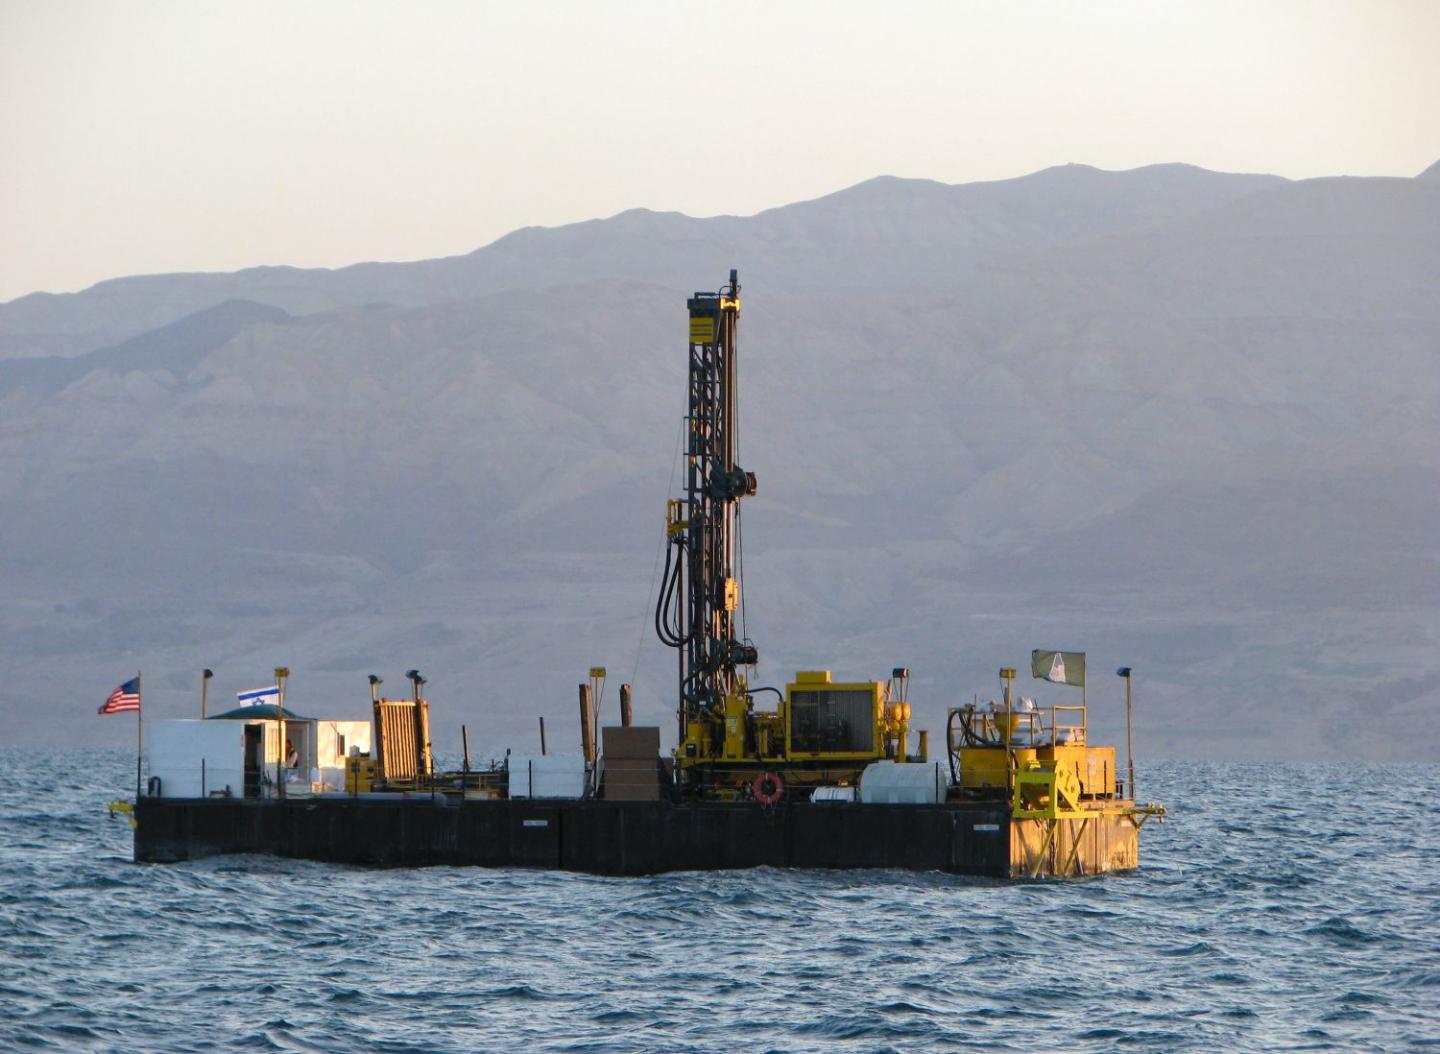 Drilling barge in the Dead Sea, 2010.